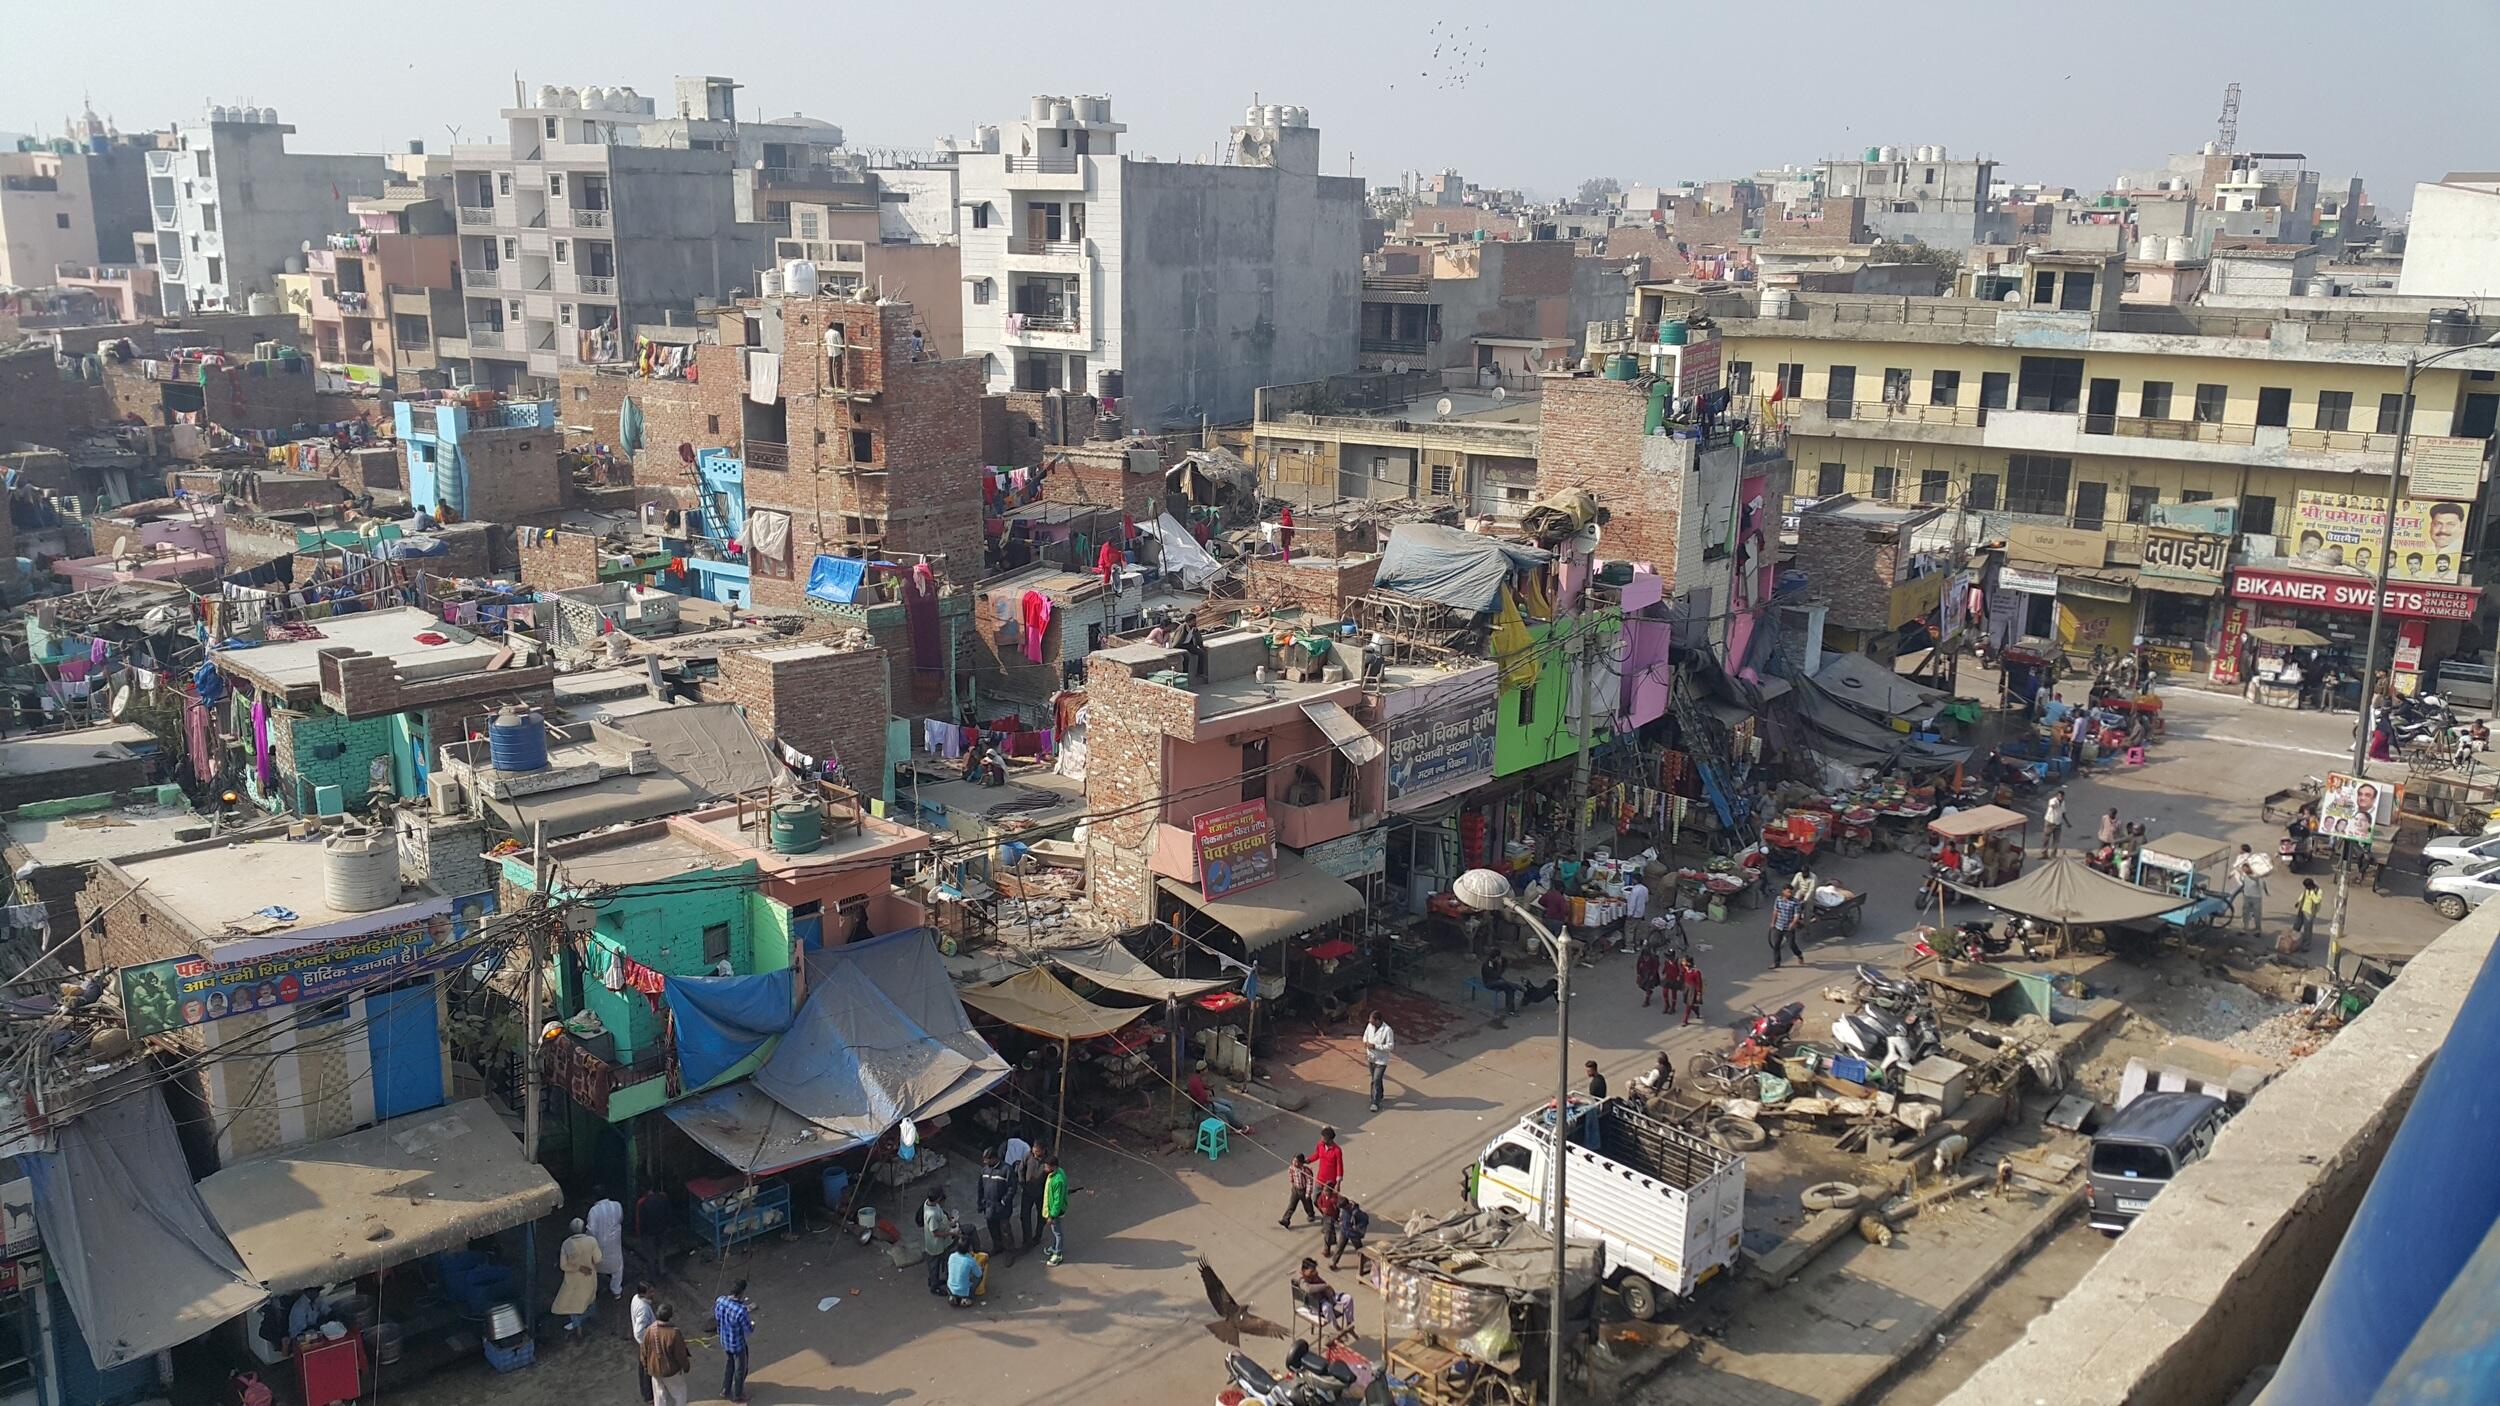 a crowded slum during the day in Delhi, India.